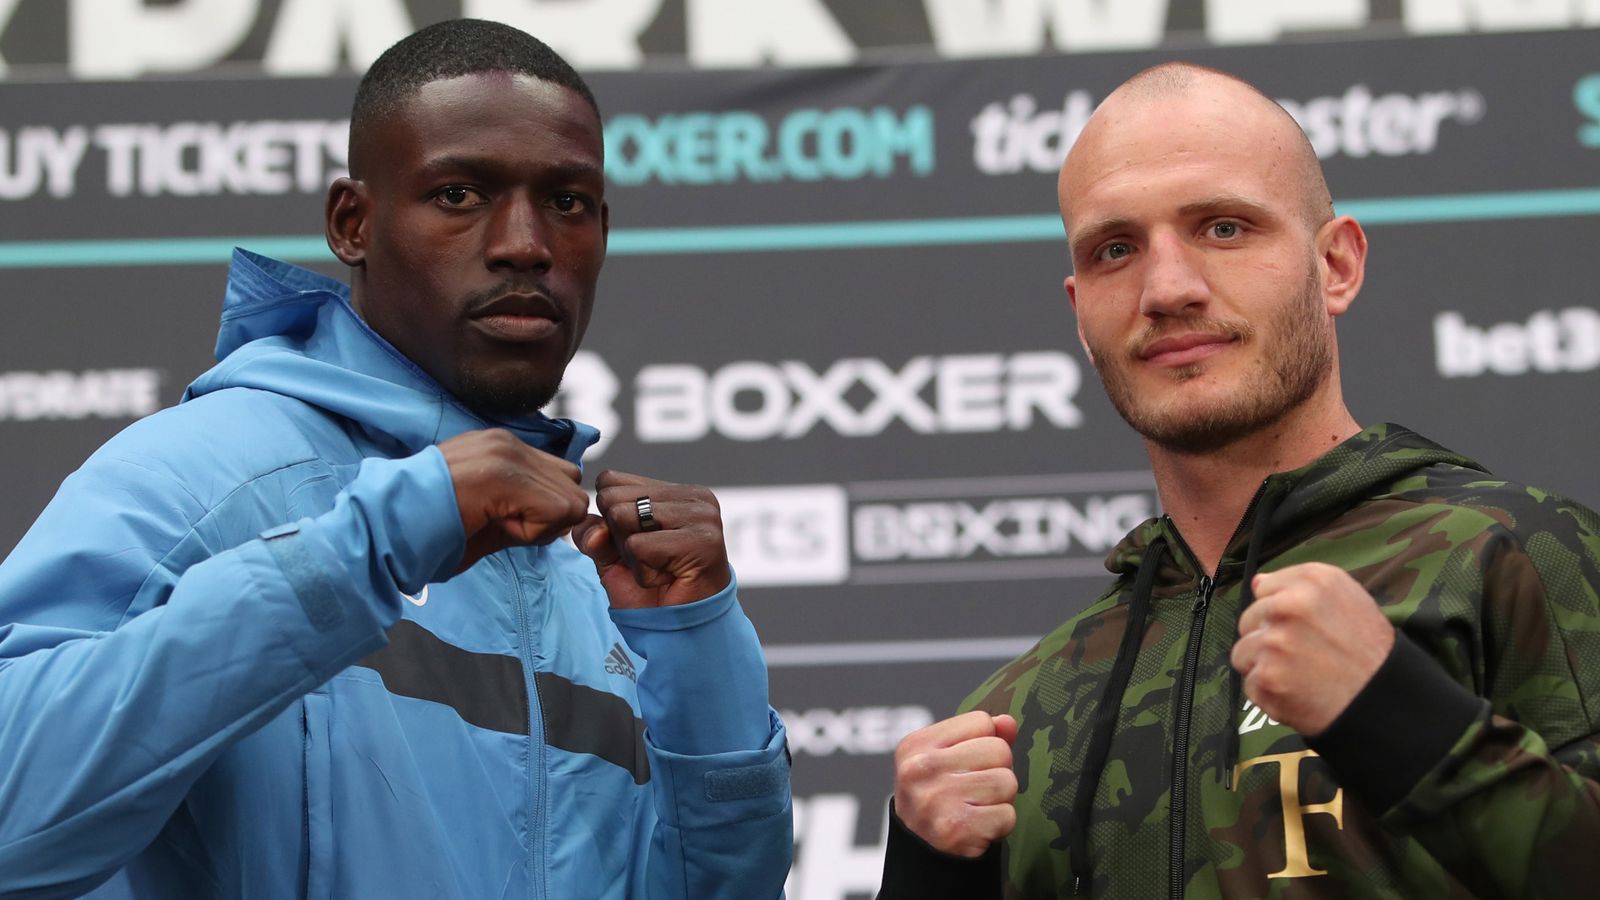 Richard Riakporhe vs Lawrence Okolie in British unification at Selhurst Park would be ‘incredible’, says Ben Shalom